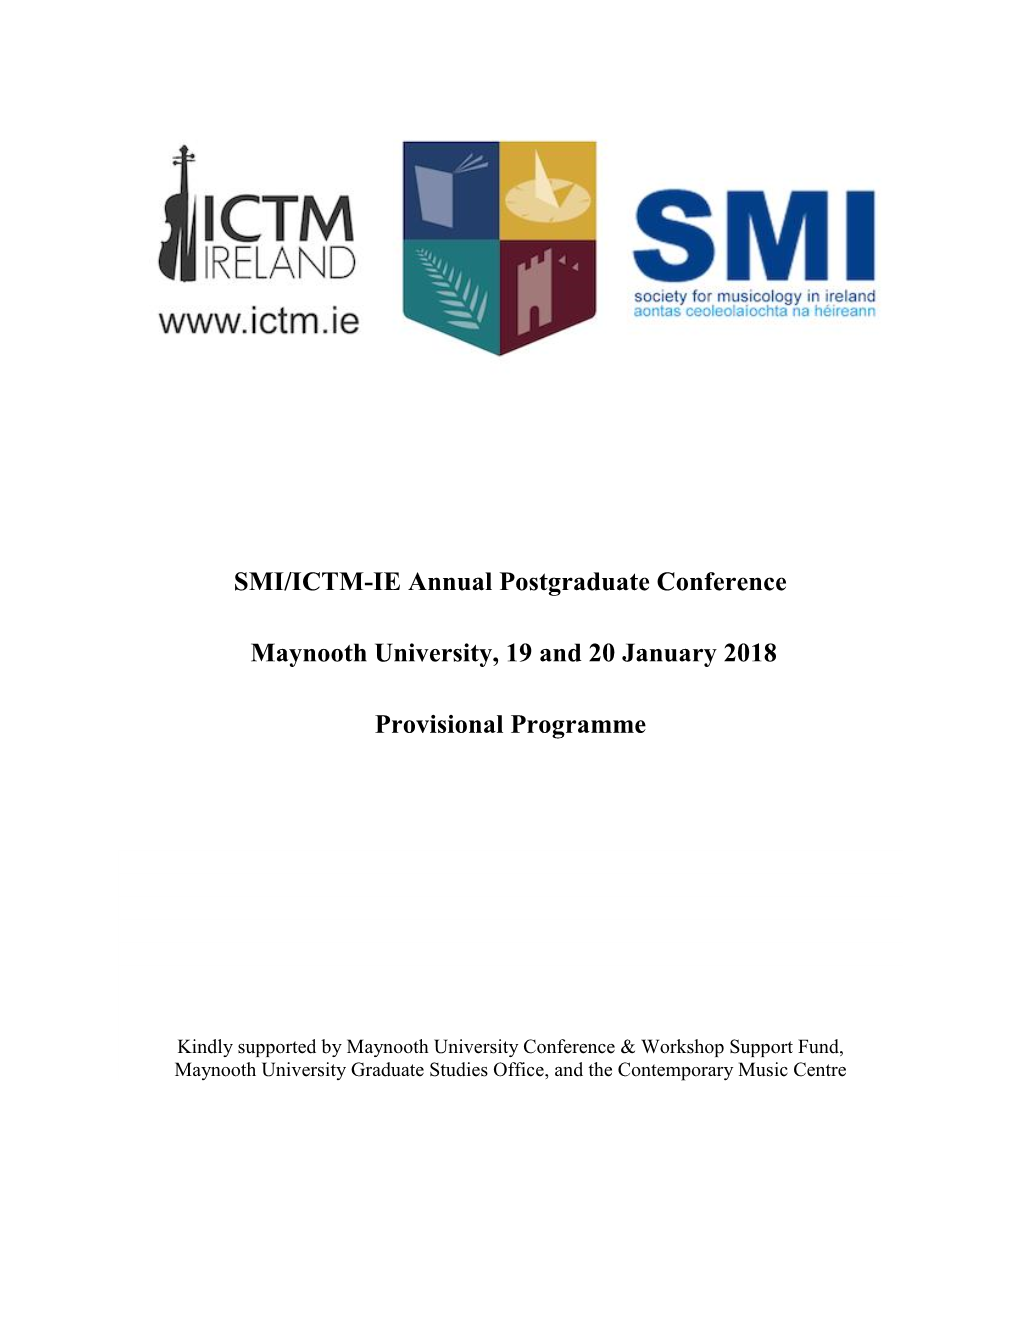 SMI/ICTM-IE Annual Postgraduate Conference Maynooth University, 19 and 20 January 2018 Provisional Programme